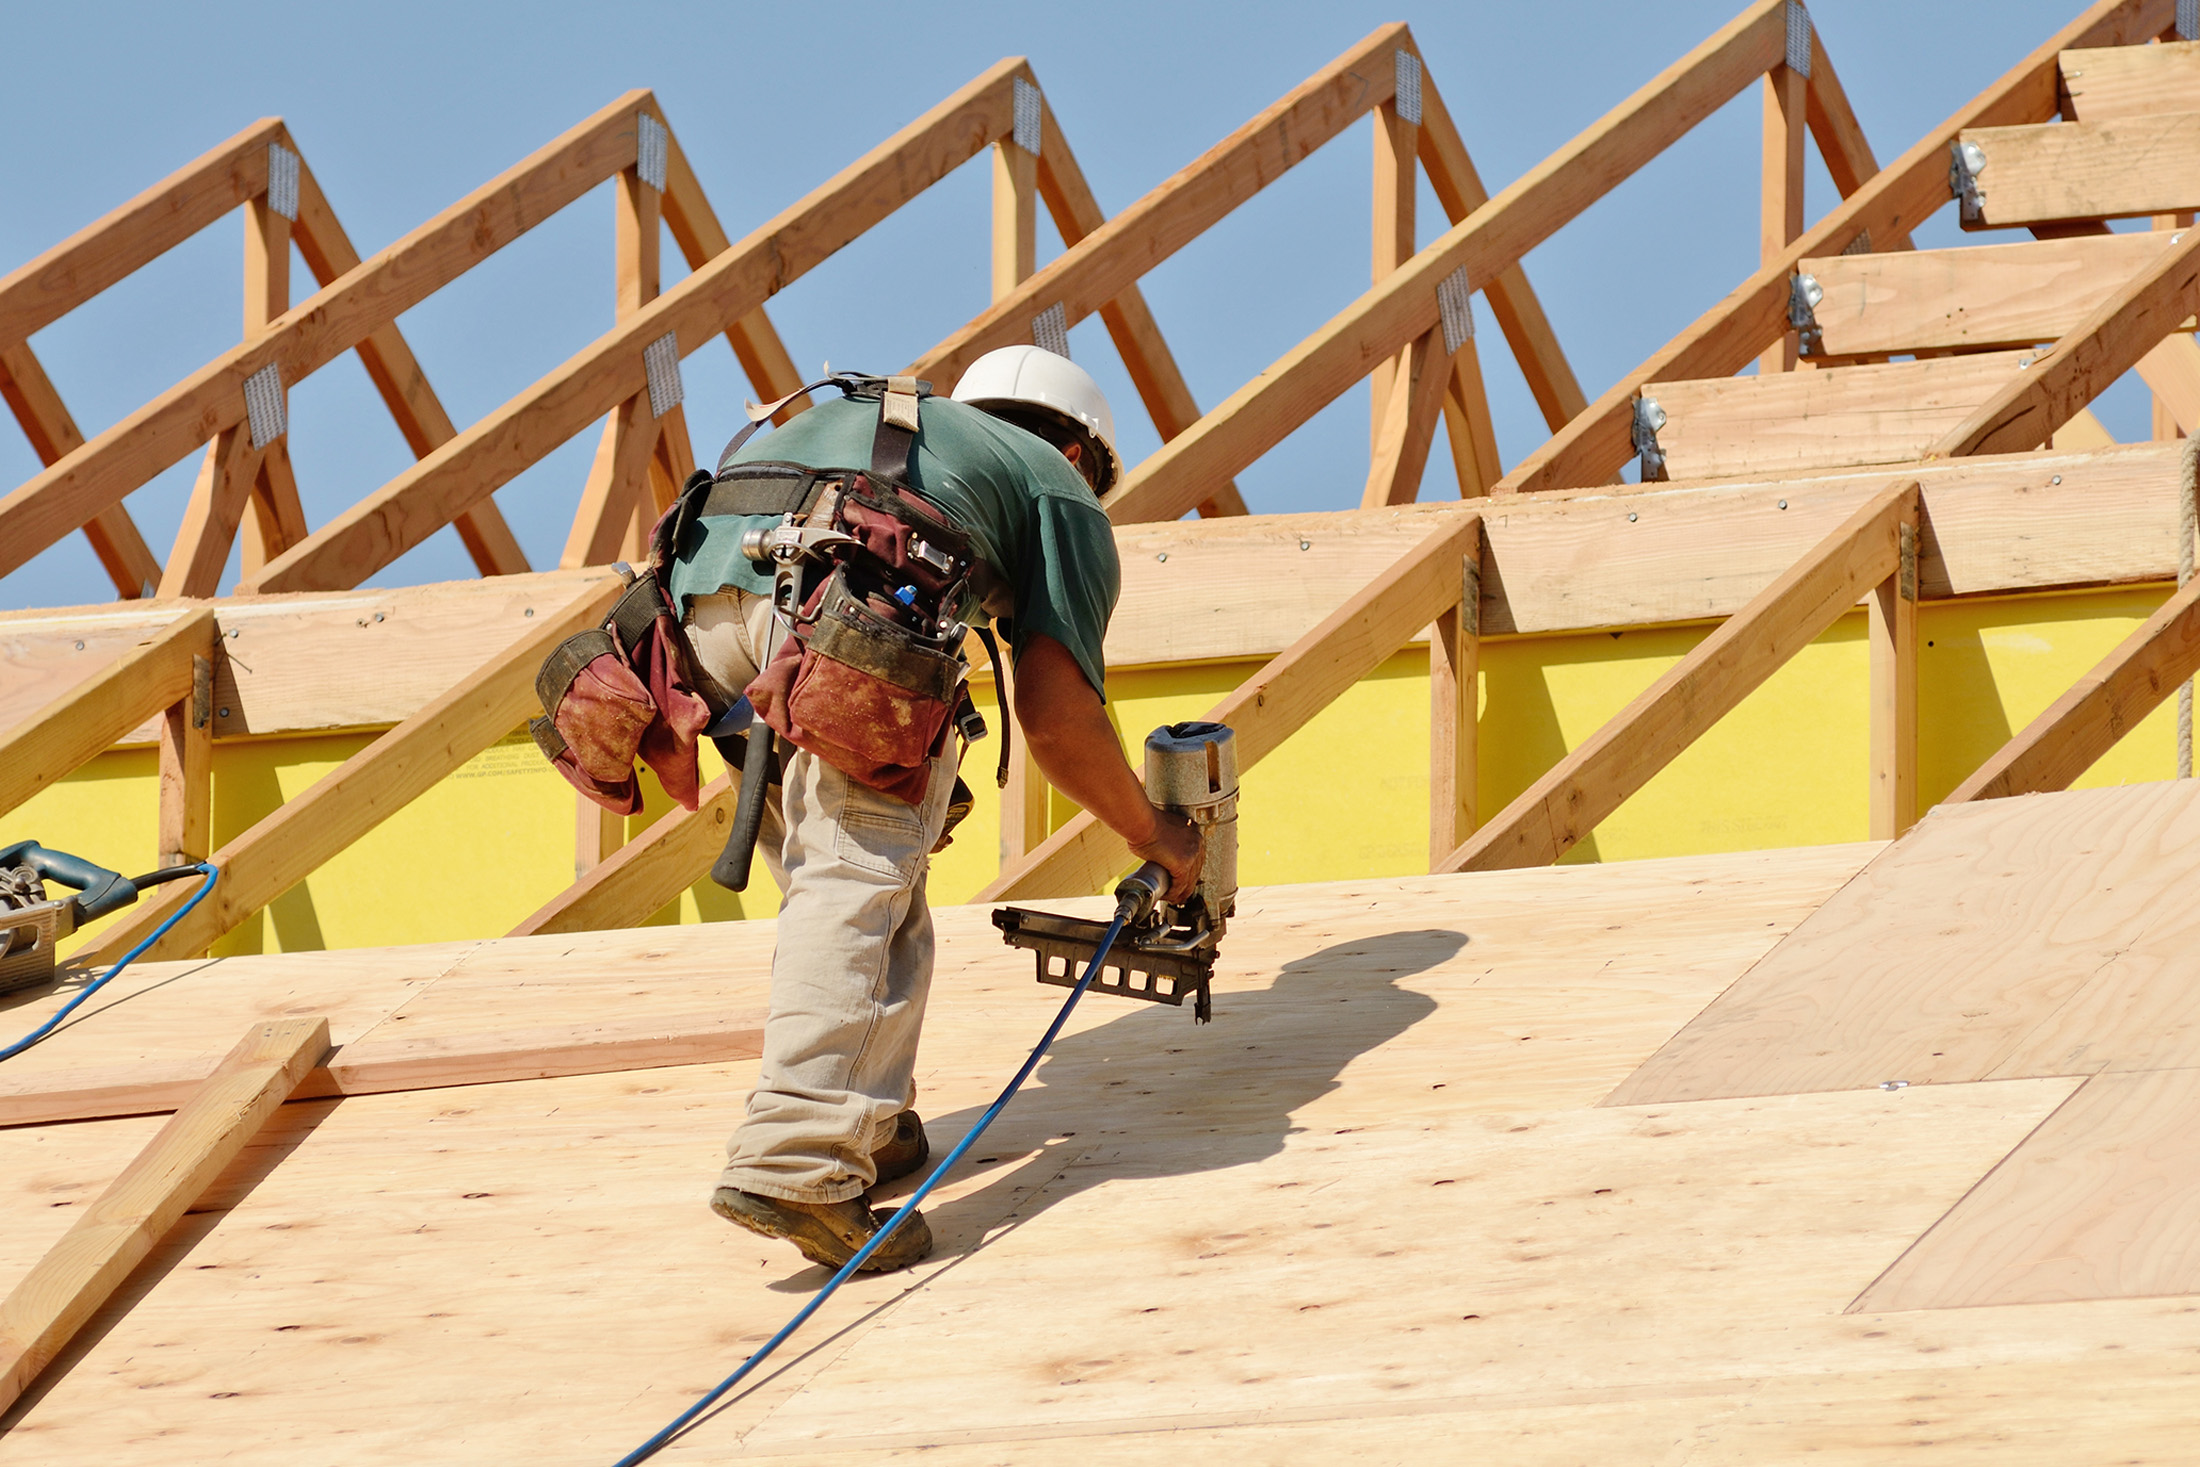 roofing services in port st lucie and melbourne fl, brevard county